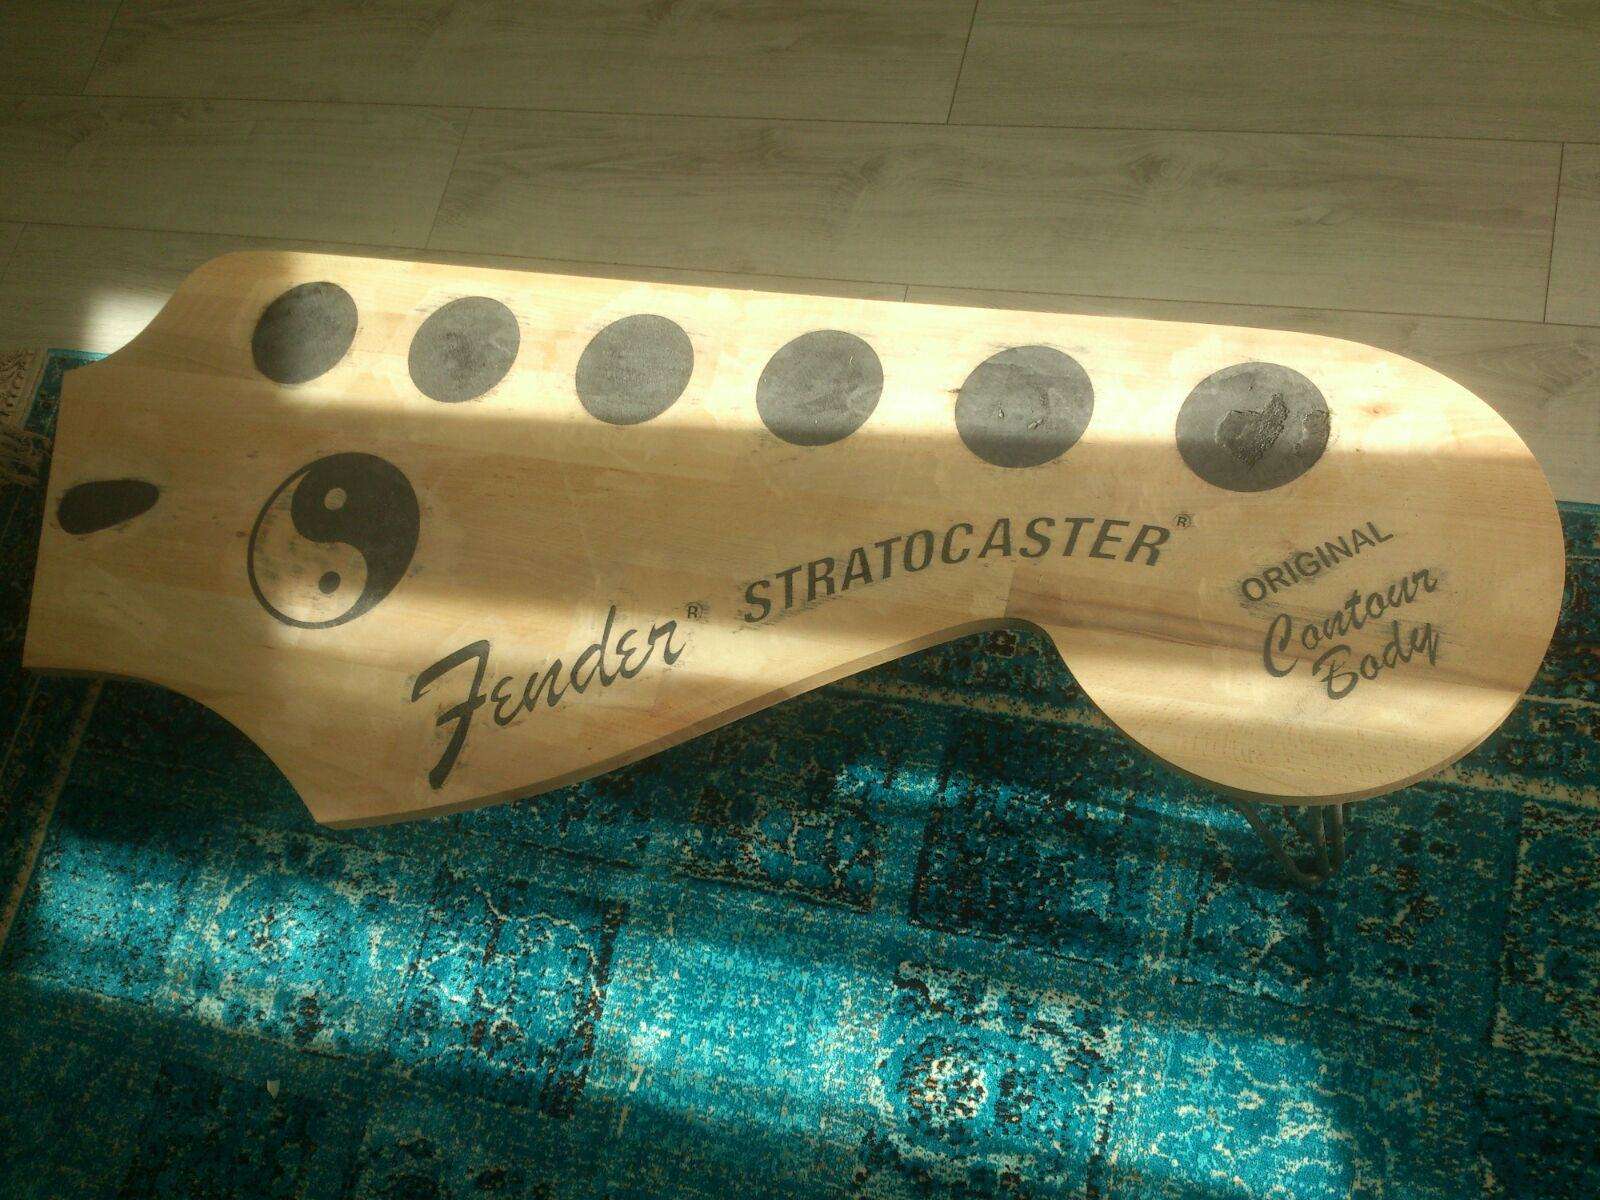 The Fender Stratocaster coffee table